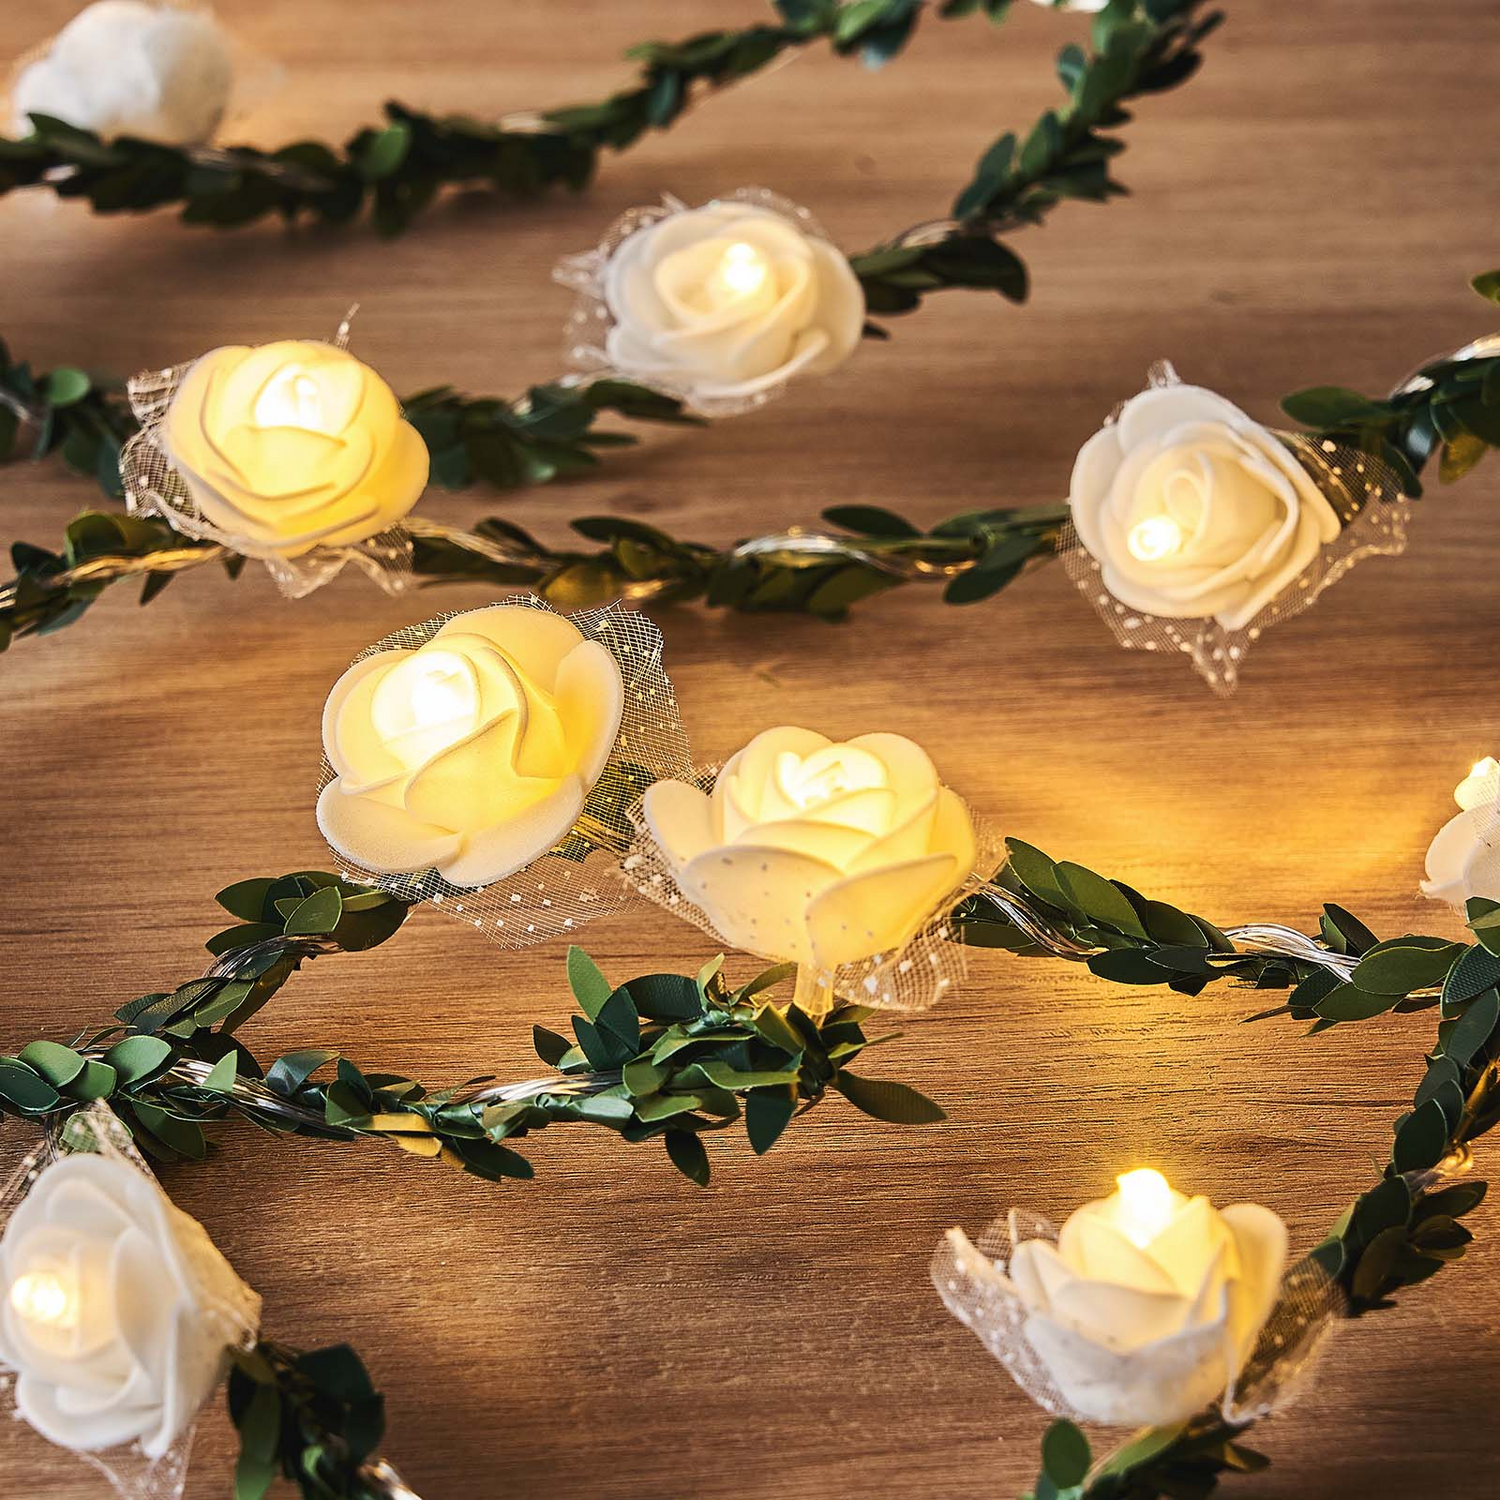 This Warm White 20 LED Faux Rose Lace Garland Vine String Lights is the perfect decoration for any occasion, be it formal or casual. It is made of high-quality artificial flowers and lace petals, and is decorated with LED light beads, enough for your guests to take photos and take pictures. It&